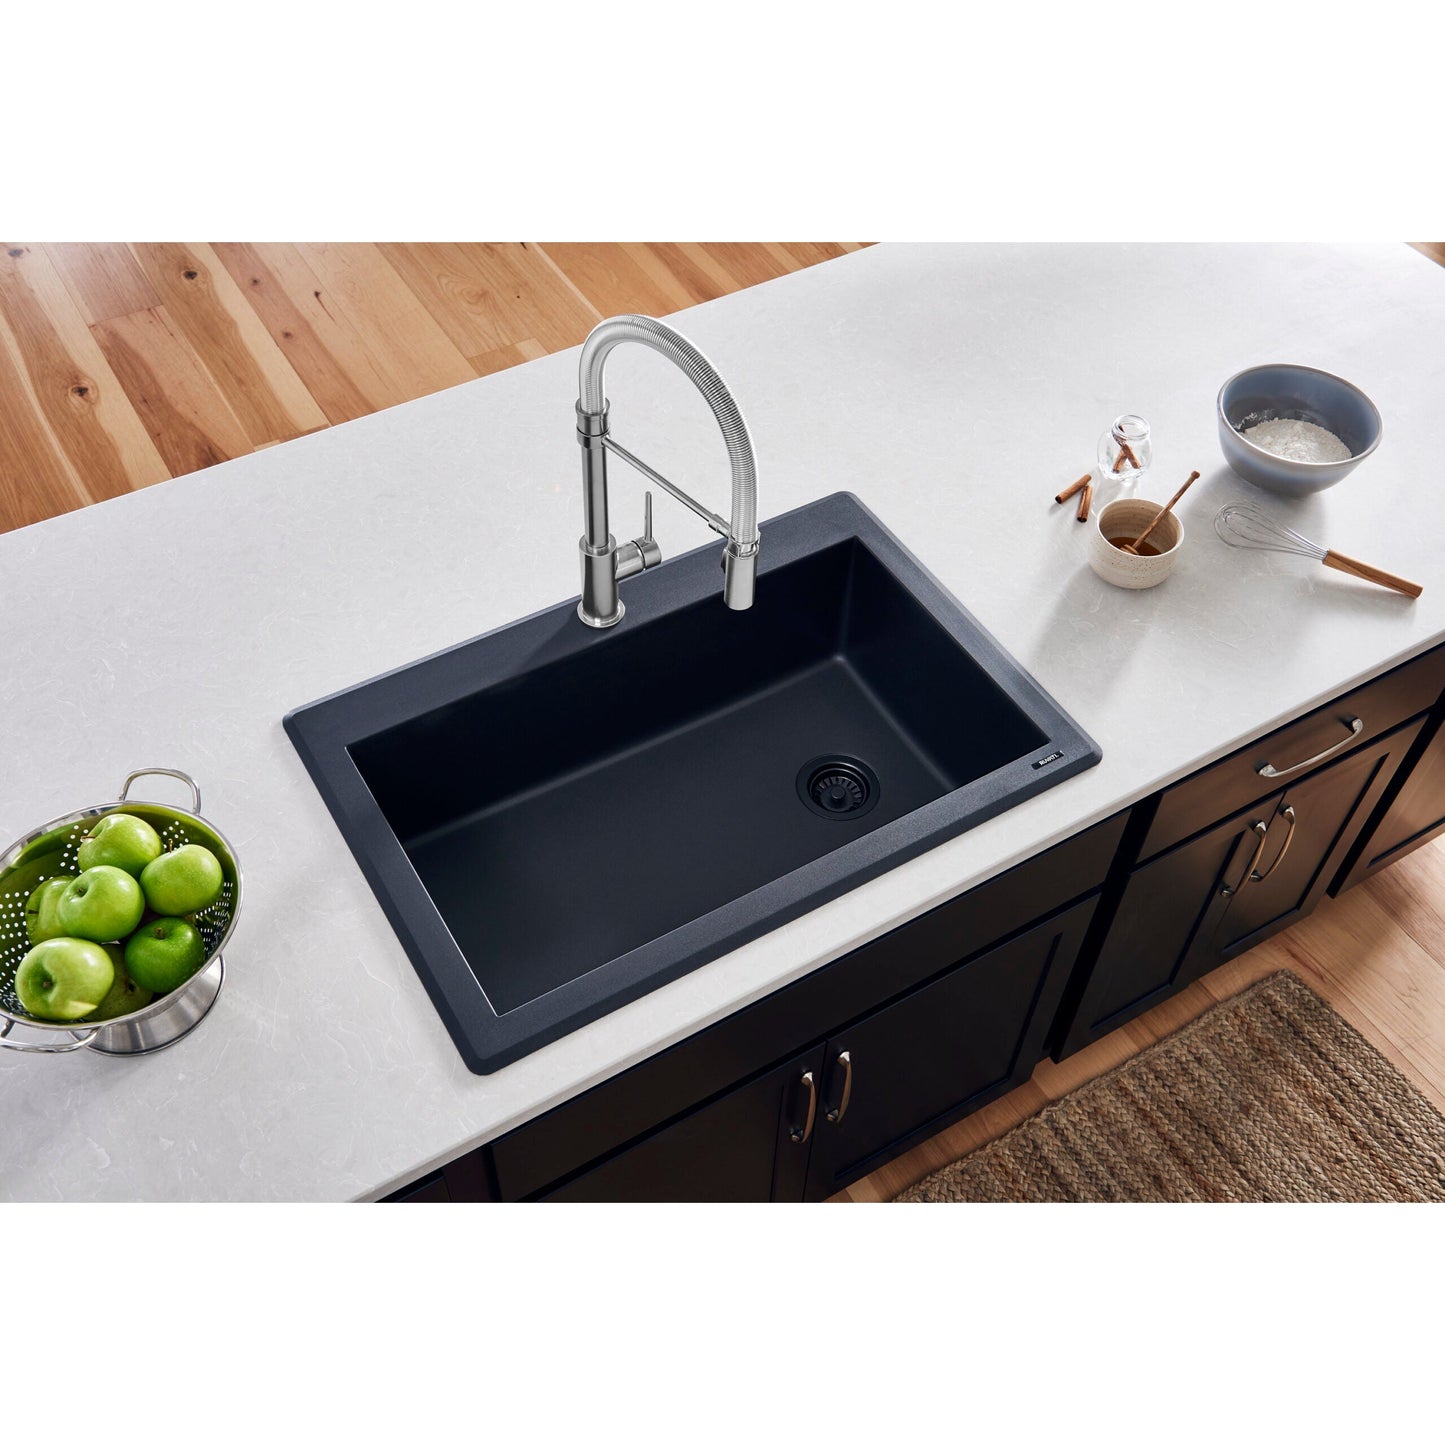 Ruvati epiGranite 33” x 22” Midnight Black Drop-in Granite Composite Single Bowl Kitchen Sink With basket Strainer and Drain Assembly